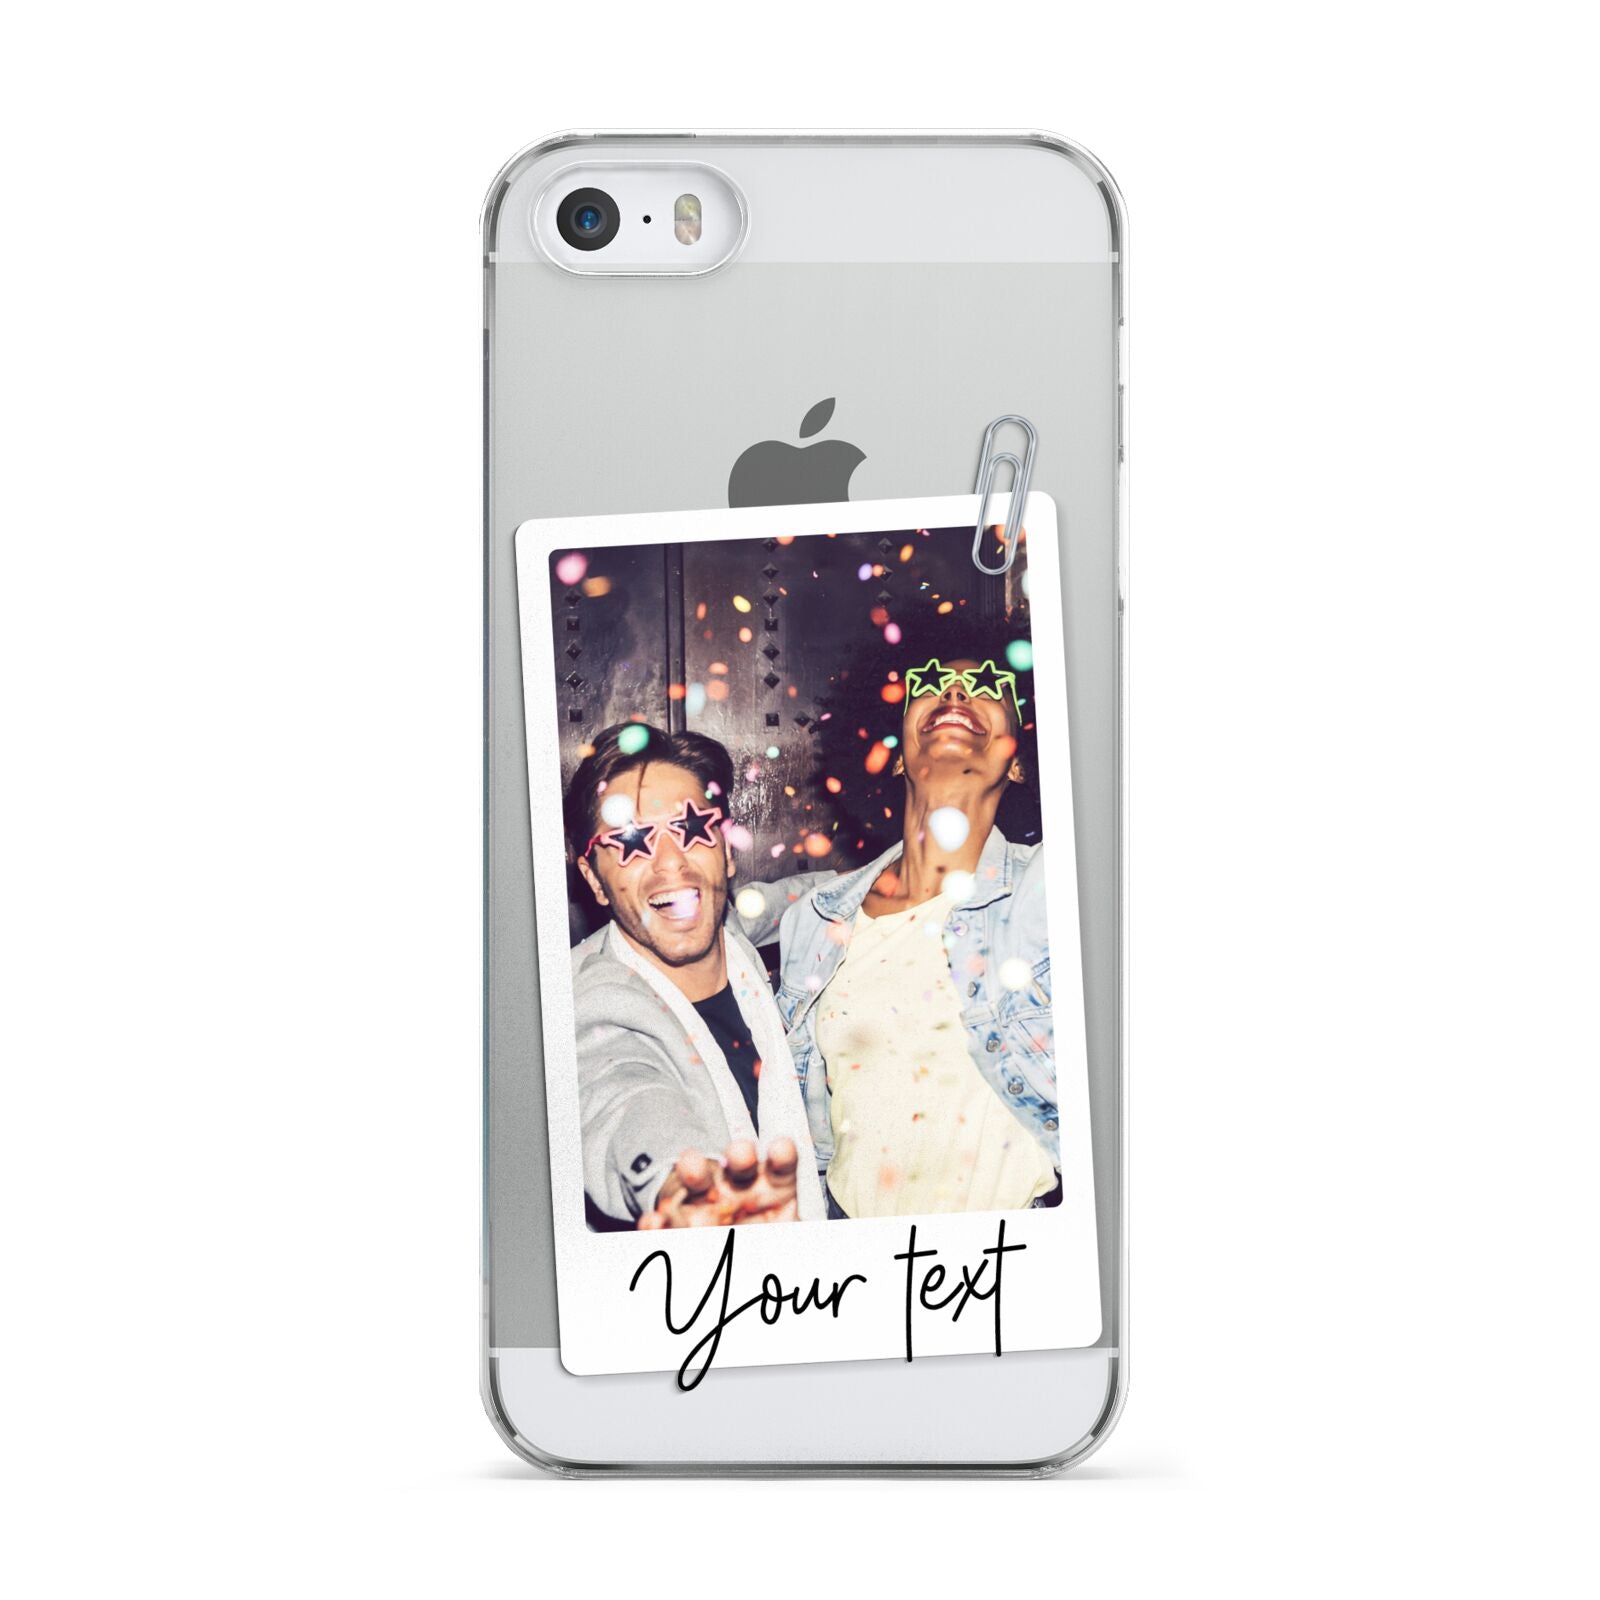 Personalised Photo with Text Apple iPhone 5 Case